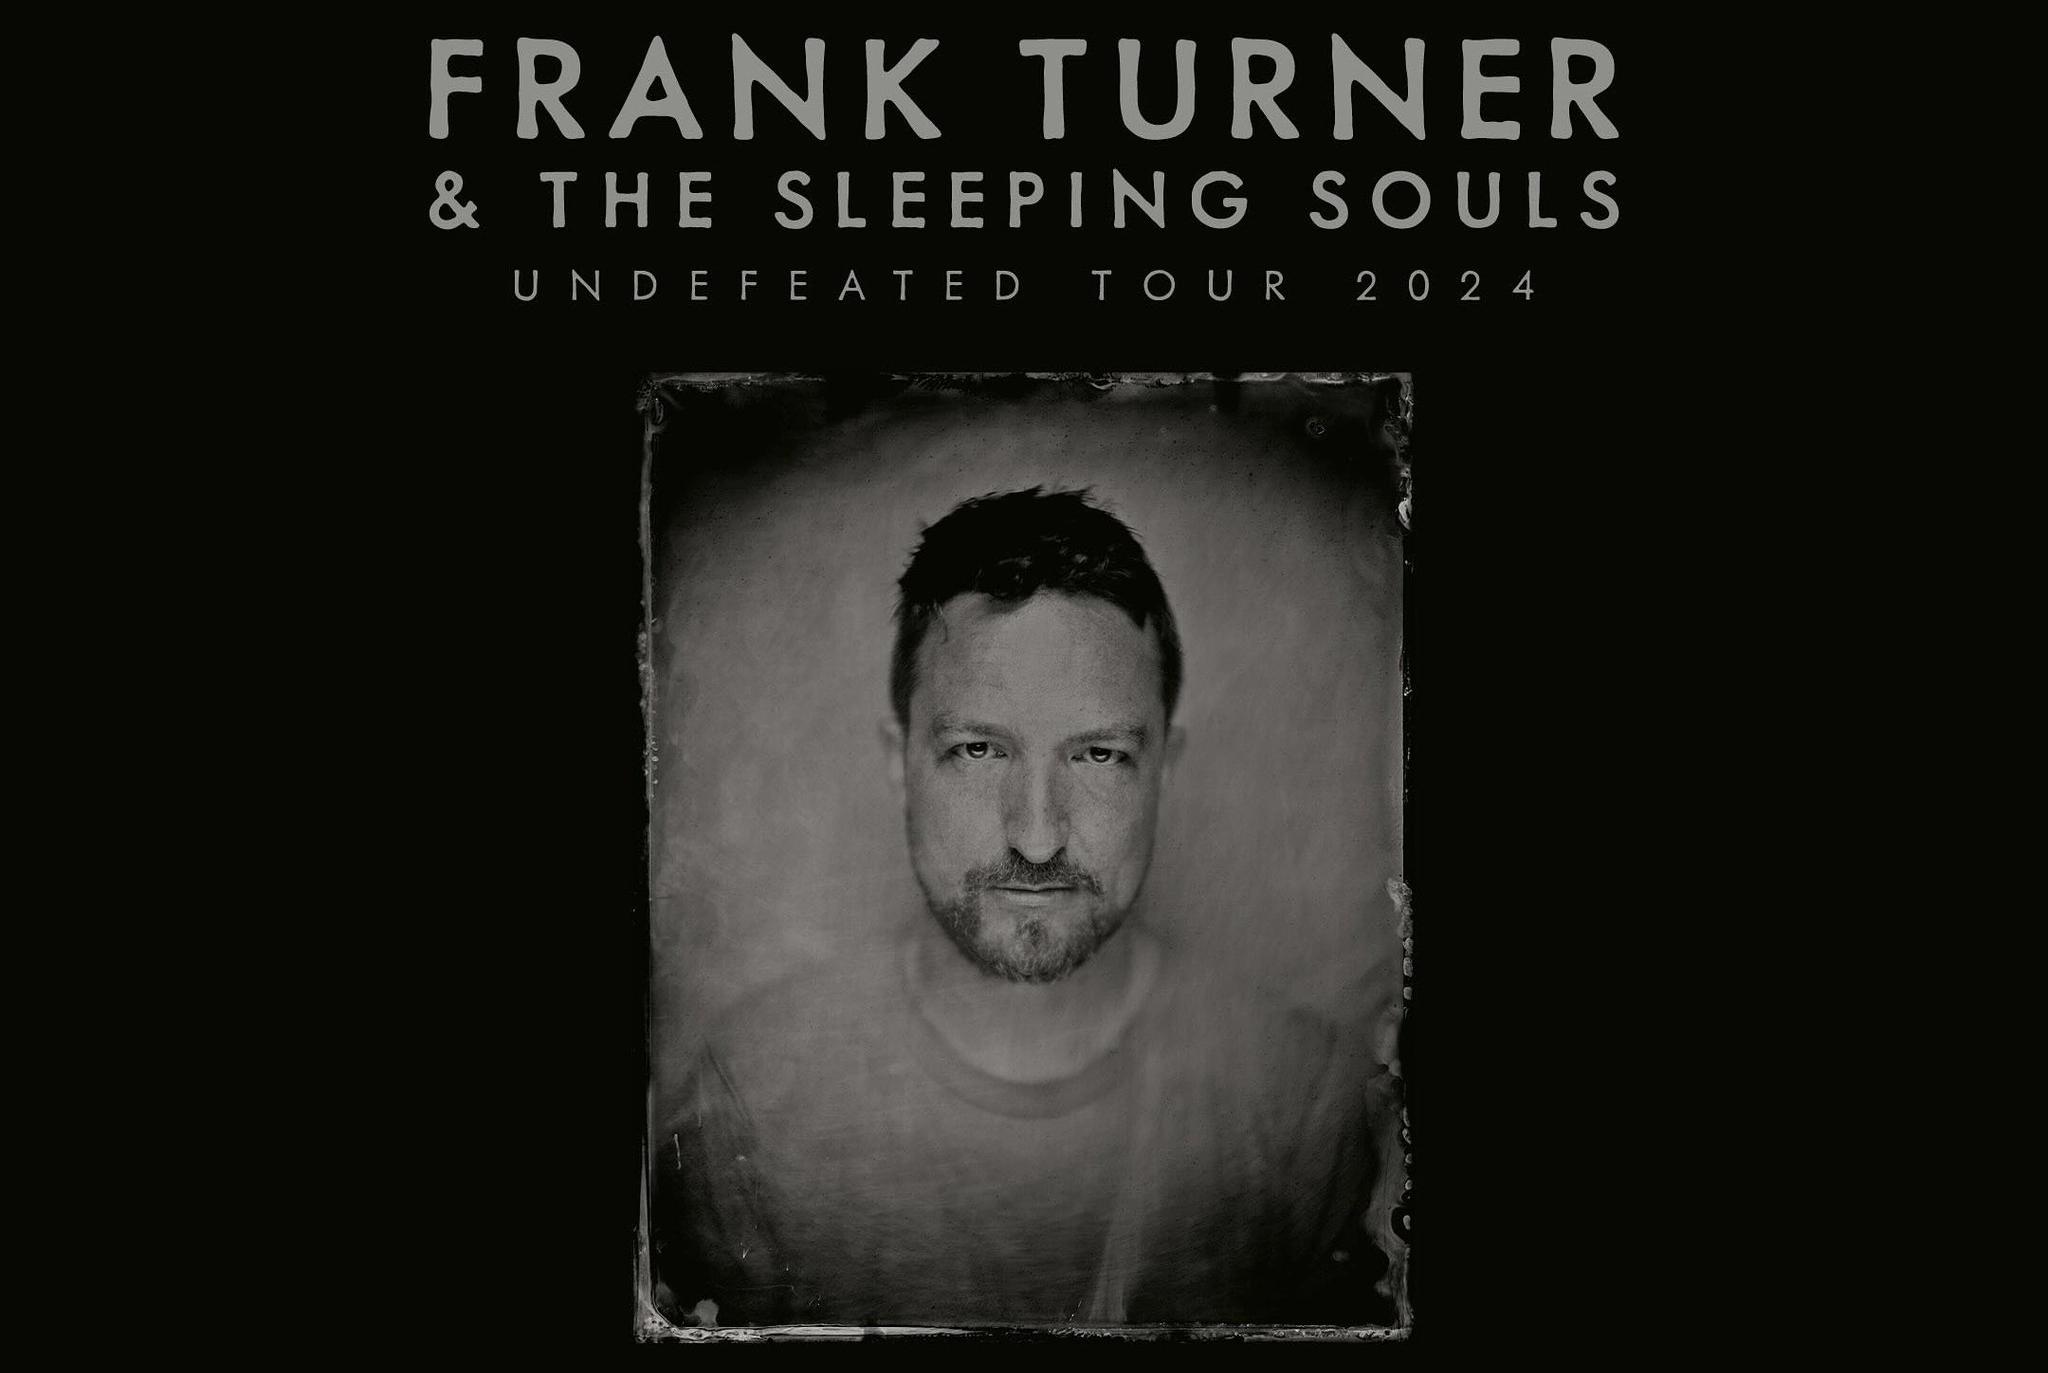 Frank Turner And The Sleeping Souls at Tramshed Cardiff Tickets